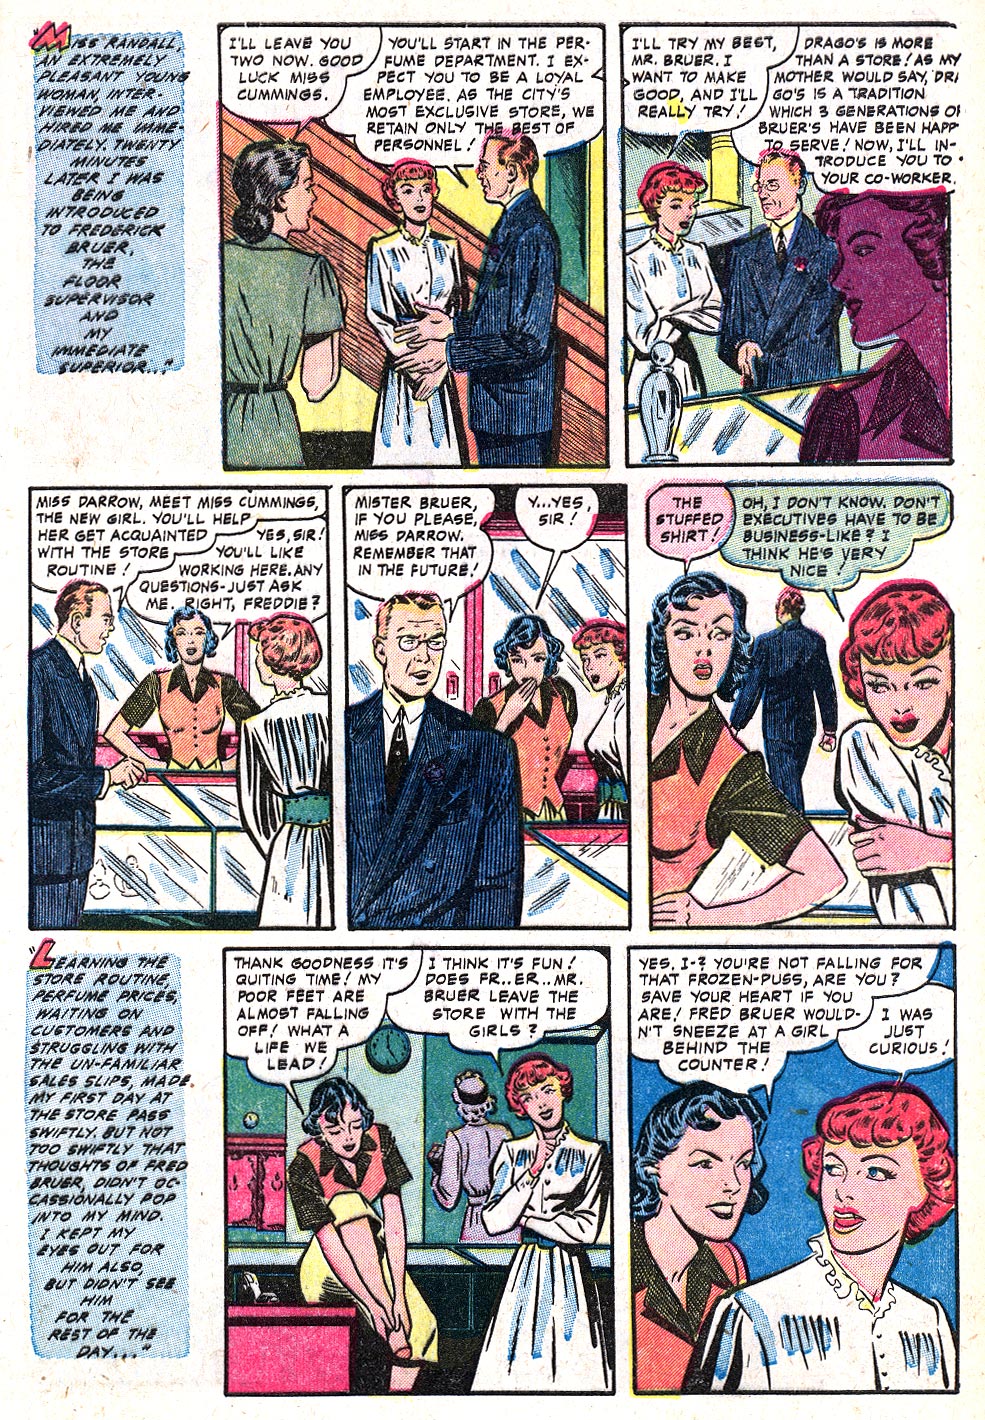 Romantic Love (1958) issue 3 - Page 5